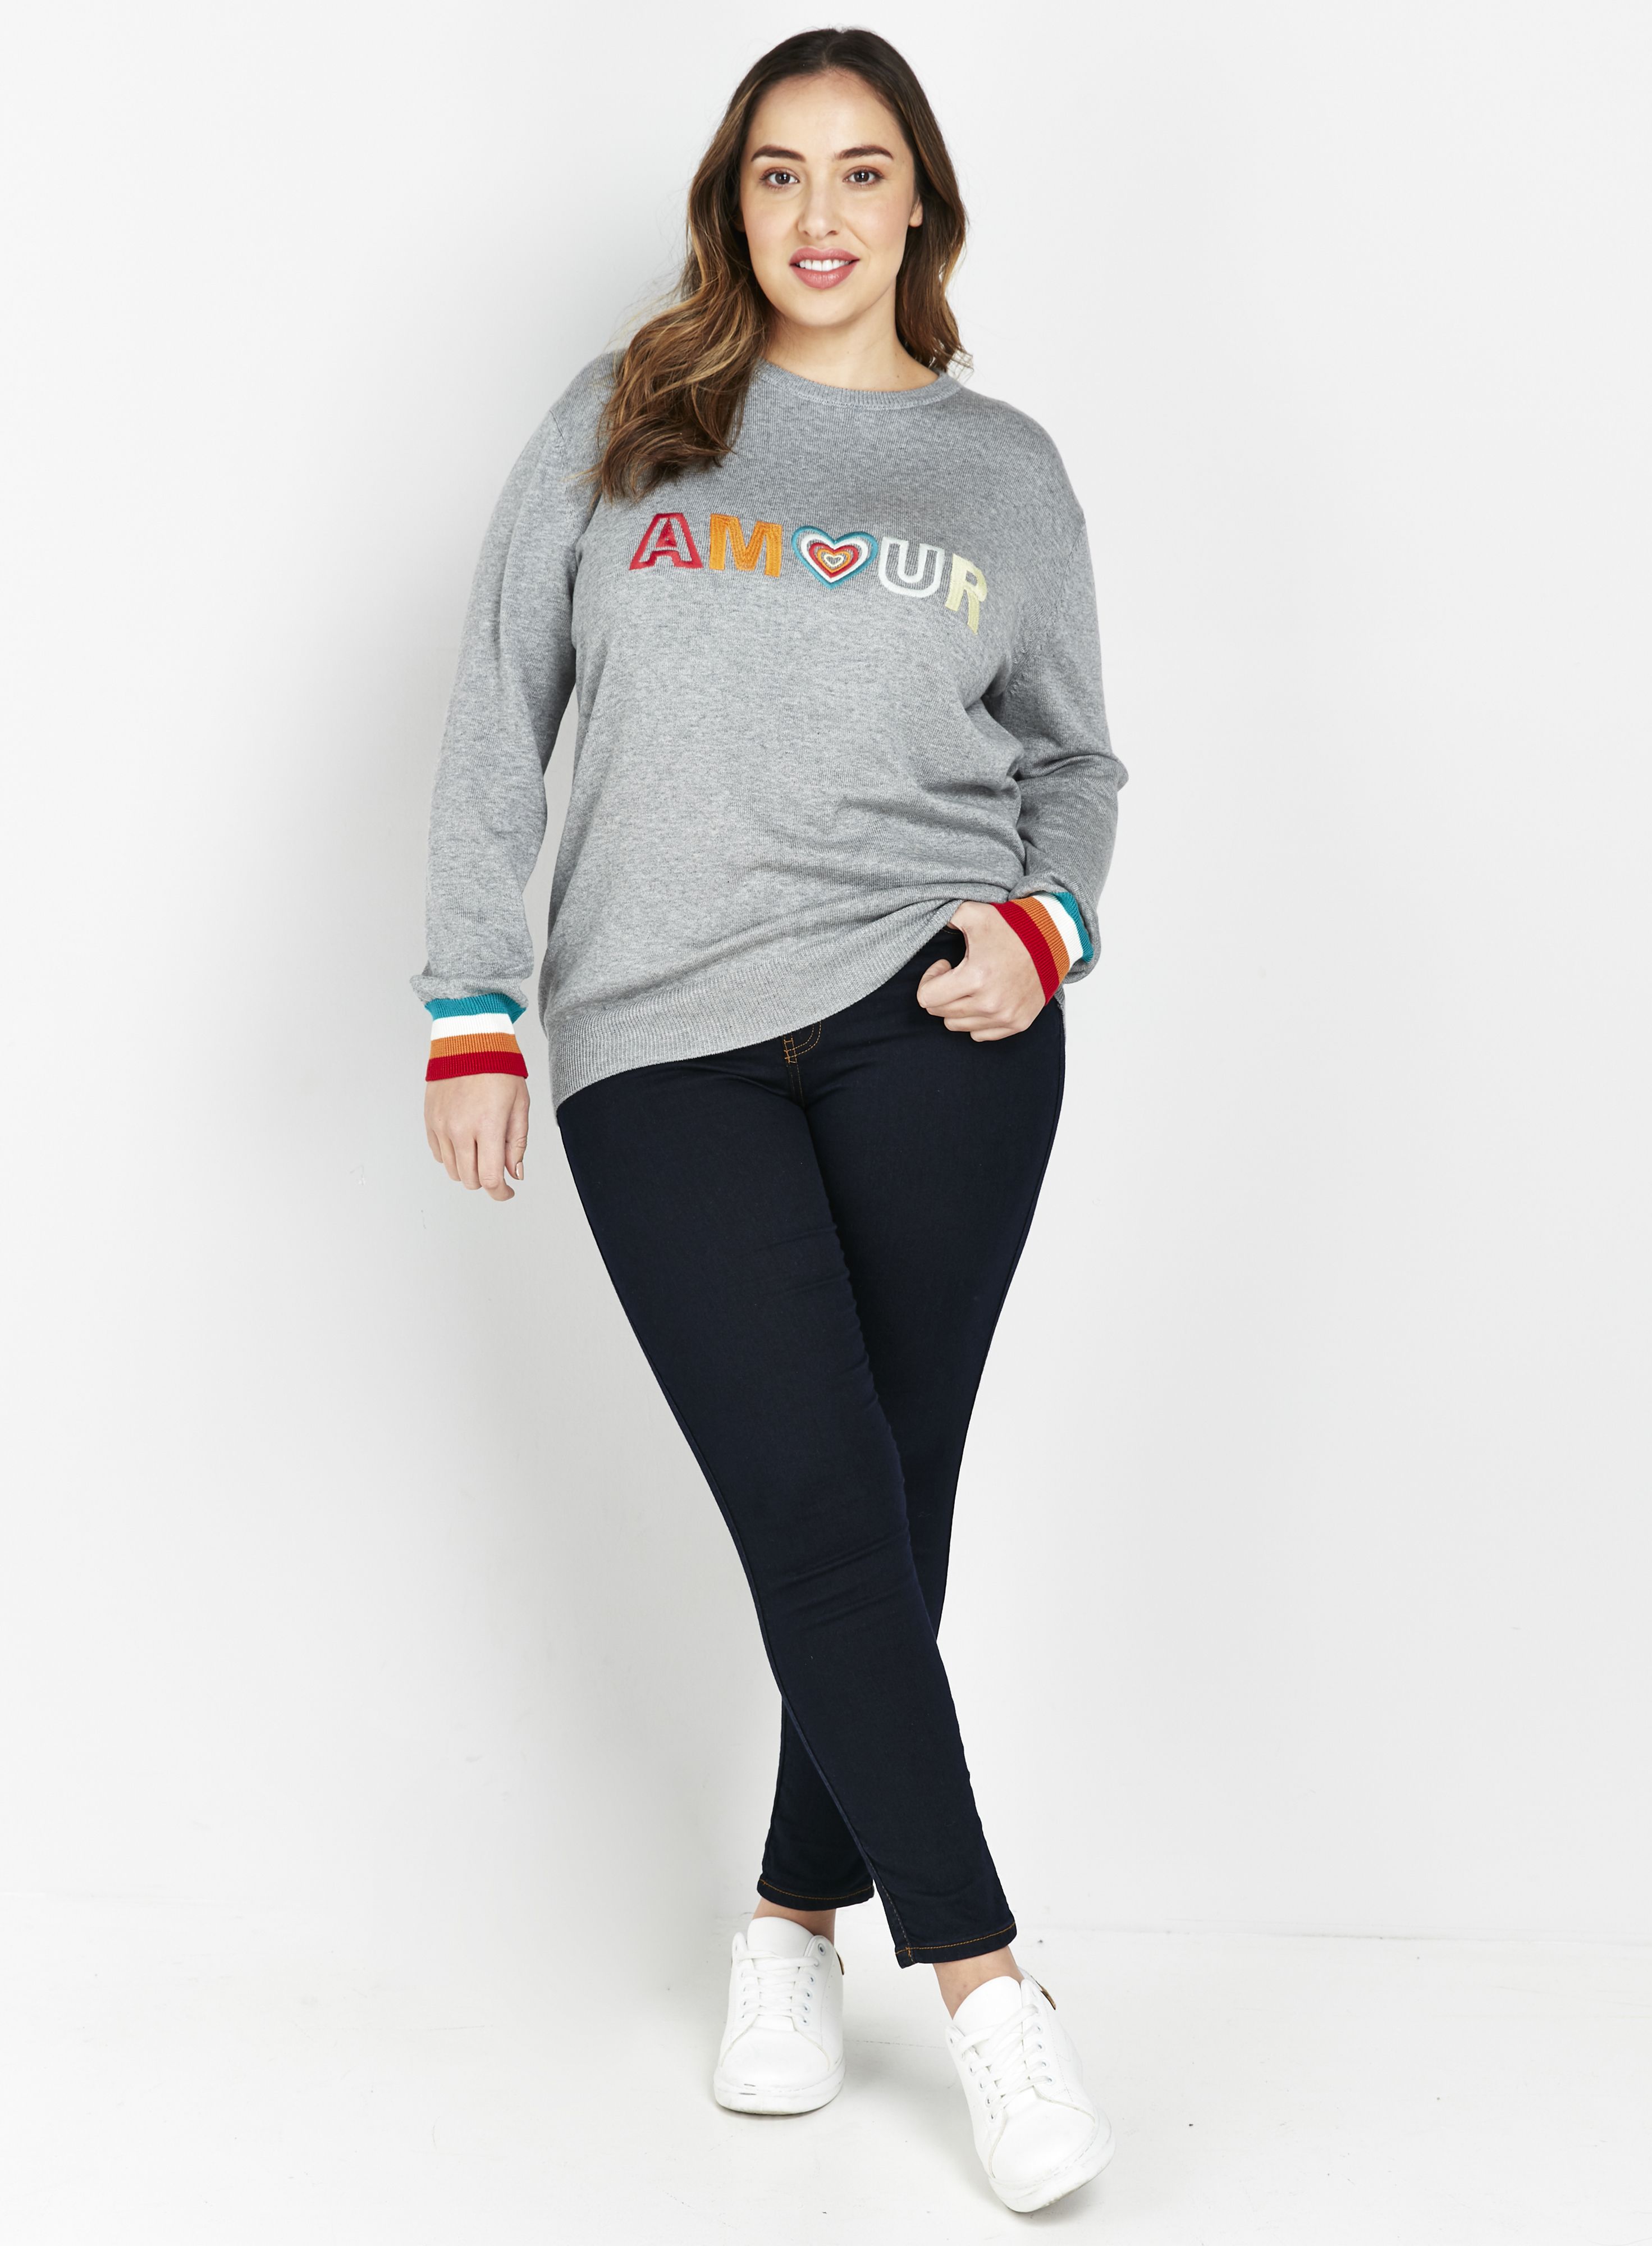 This cute slogan jumper will add a pop of colour to your everyday wardrobe. Rainbow detailing and a cute heart design keep this contemporary, whilst a relaxed fit and laid-back grey hue will have you wearing this on-repeat. Wear with jeans and chunky ankle boots, layering over a padded coat for cosy winter walks.  Jumper Round neck Long sleeve Relaxed Casual 56% Acrylic, 44% Cotton Machine washable